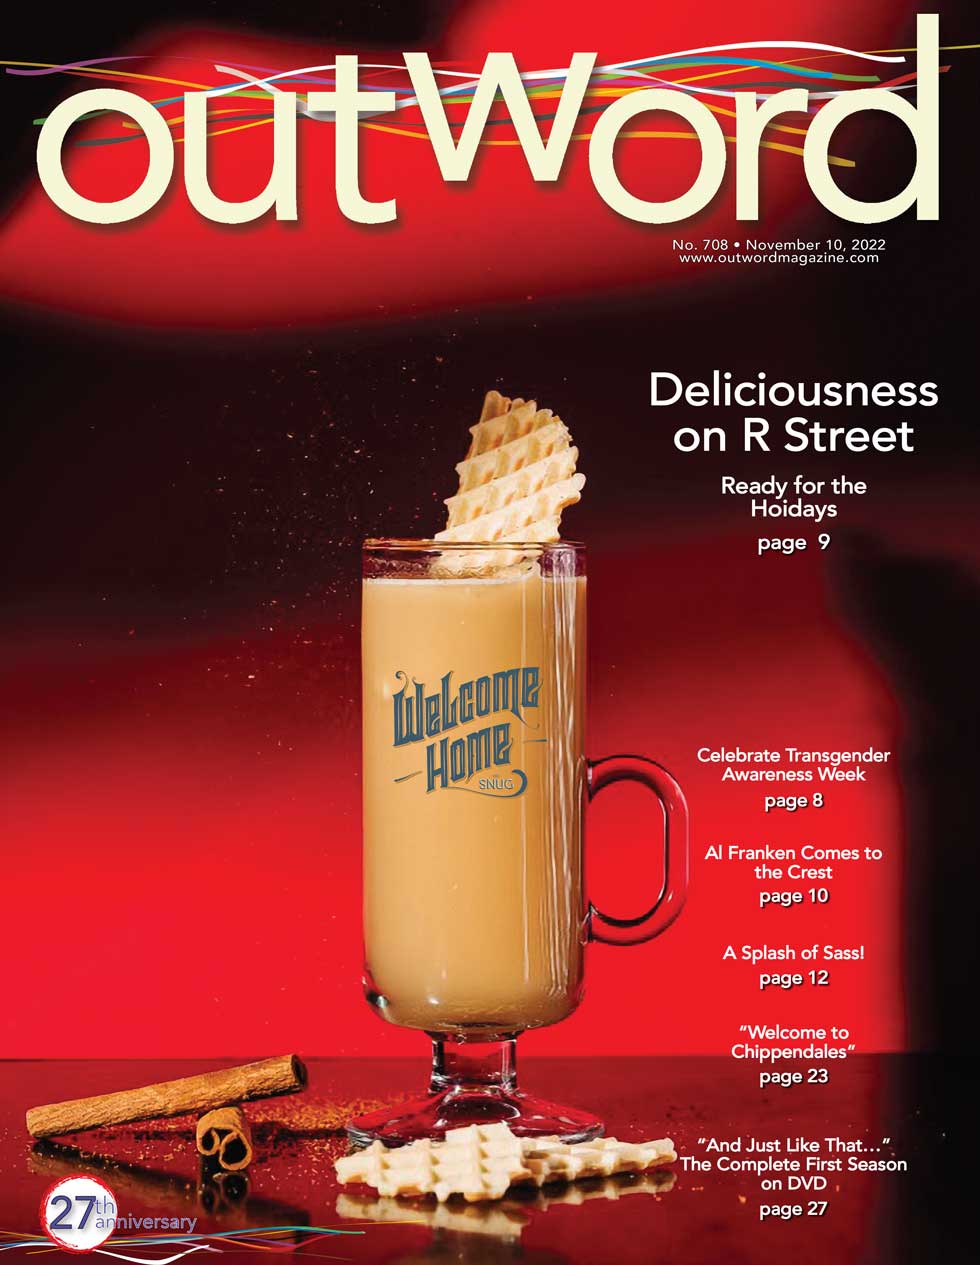 November 11, 2022 | The November 10 issue of Outword is Out Now!